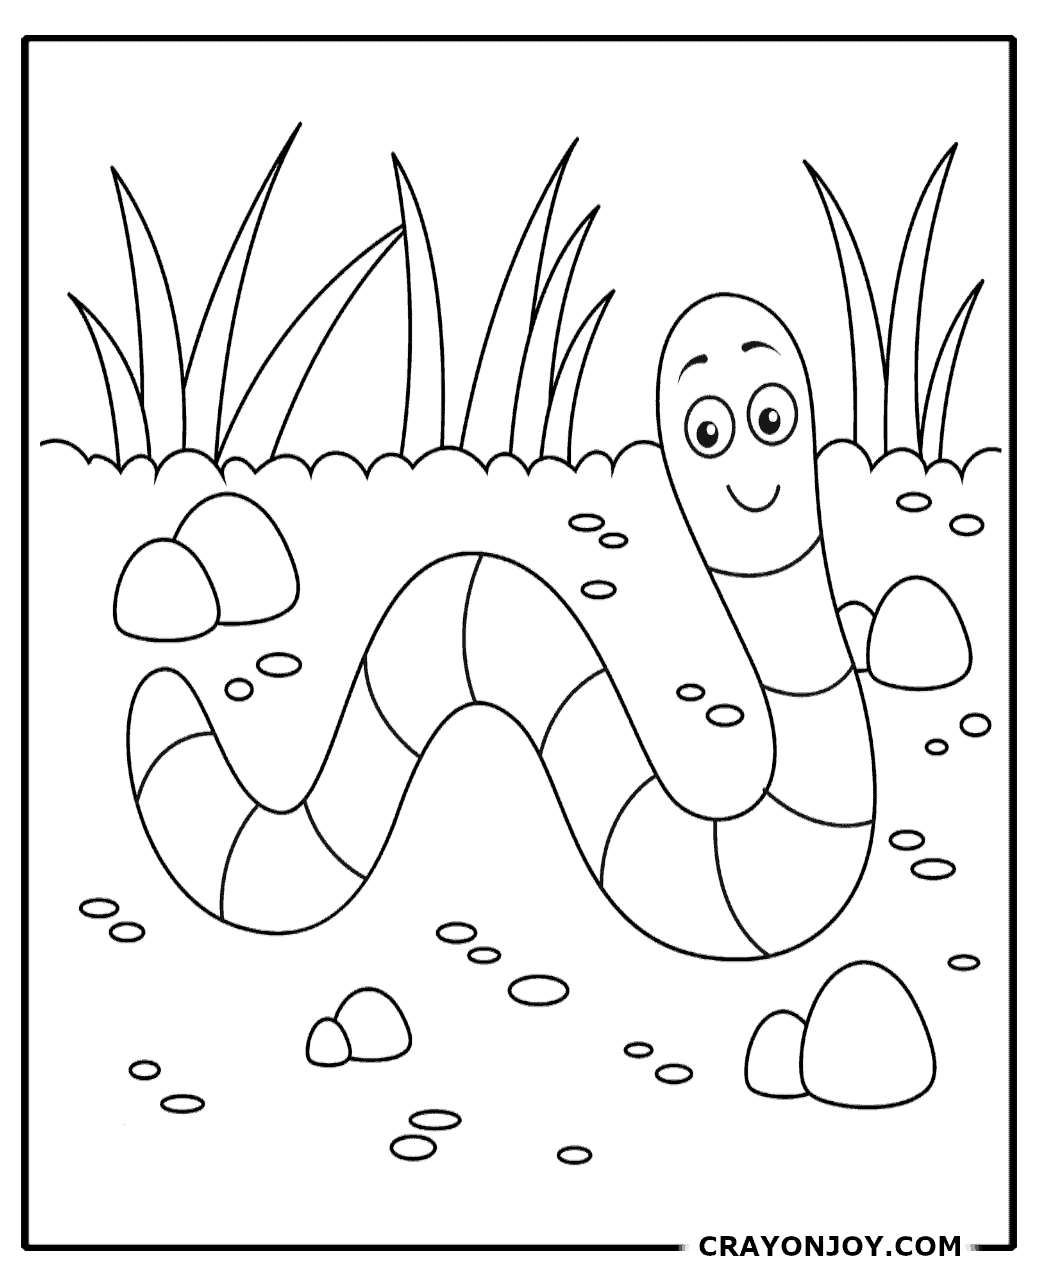 Free Printable Earthworm Coloring Pages for Kids & Adults